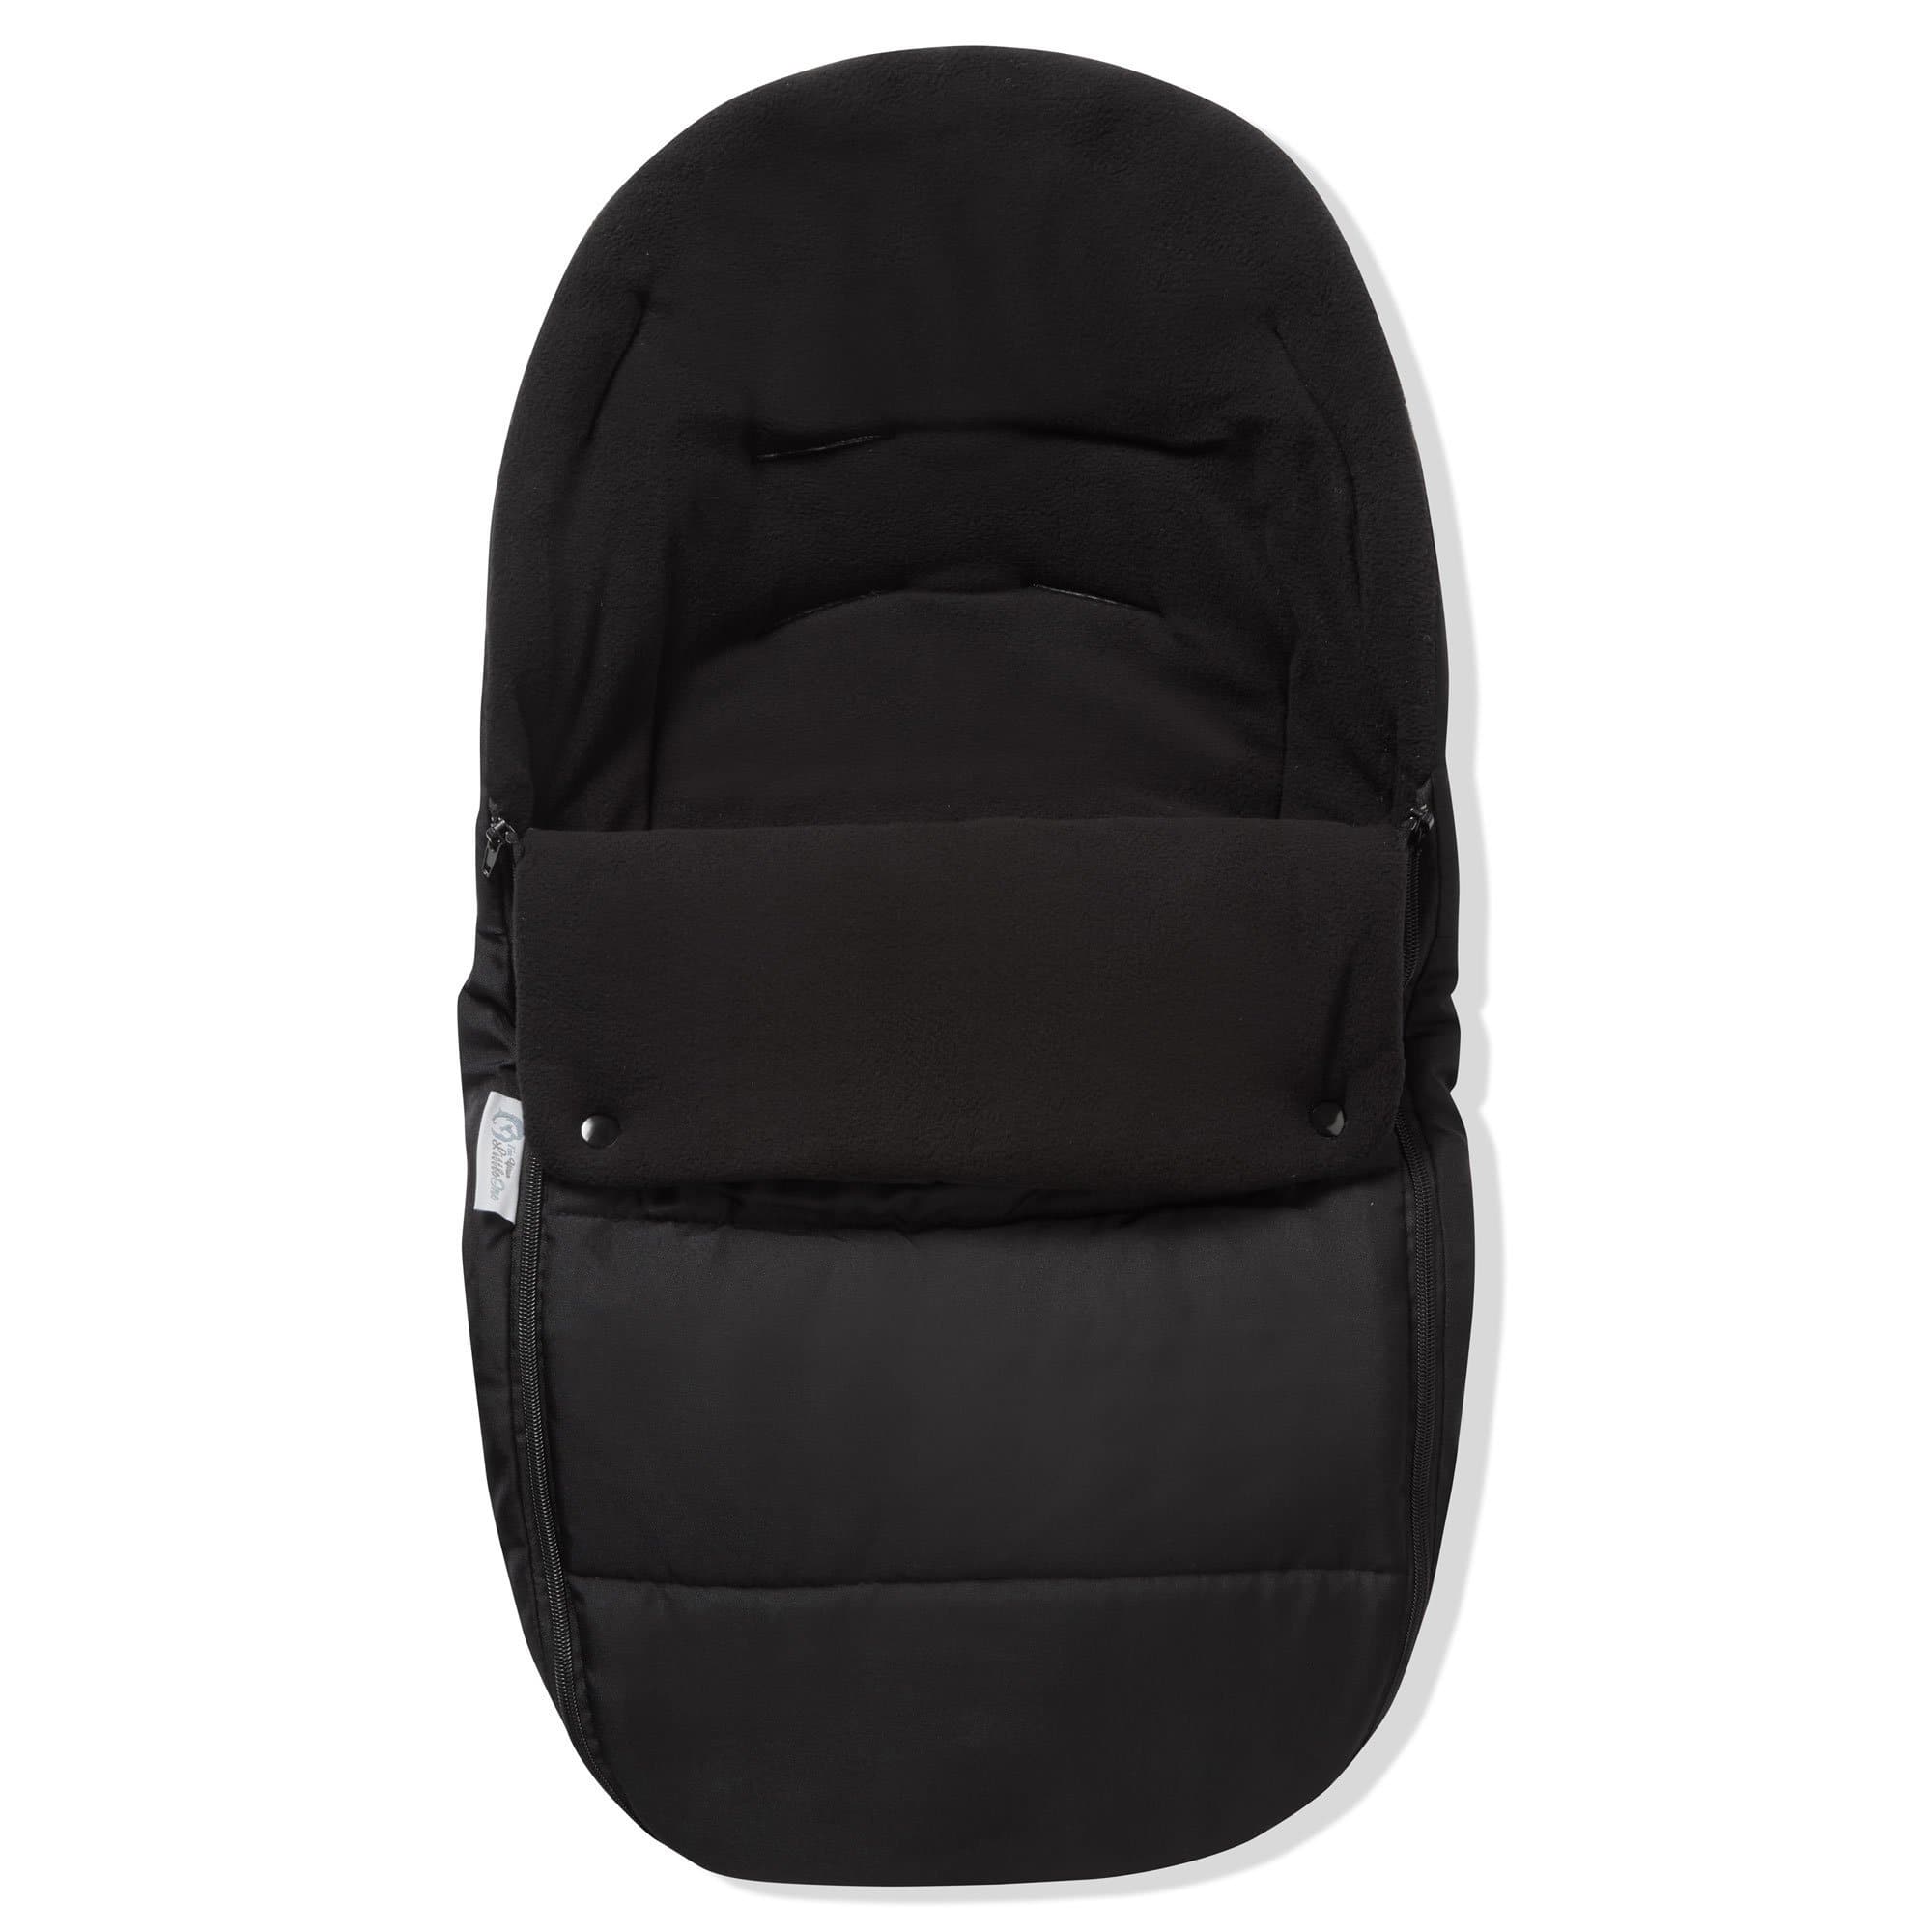 Premium Car Seat Footmuff / Cosy Toes Compatible with Infababy - Black Jack / Fits All Models | For Your Little One